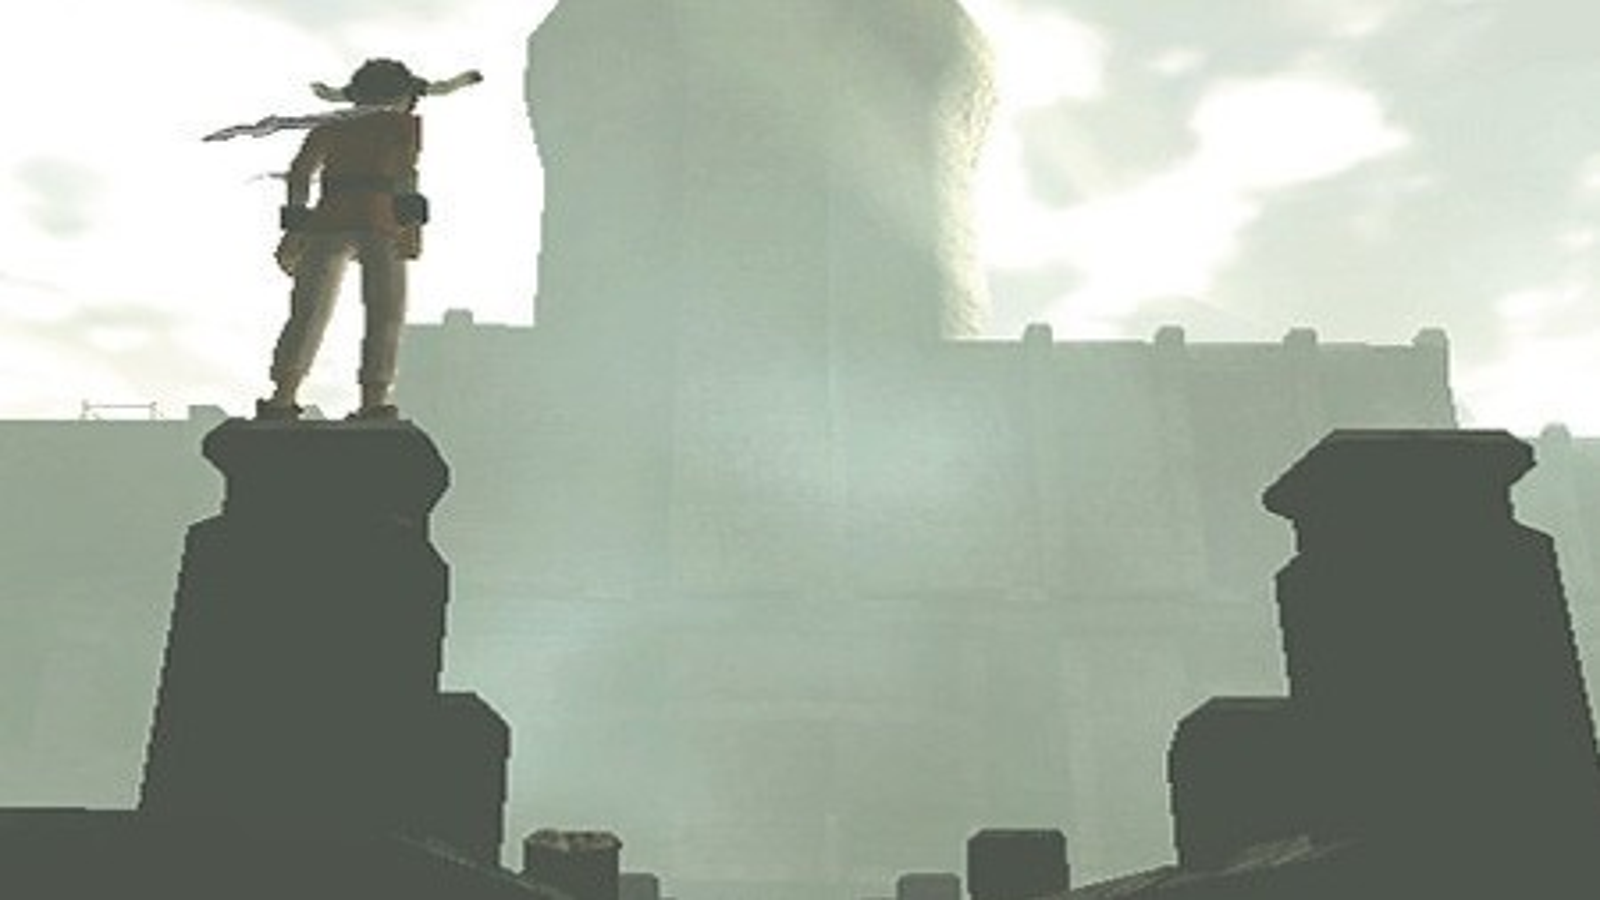 Fumito Ueda's The Last Guardian launches Dec. 6 on PlayStation 4